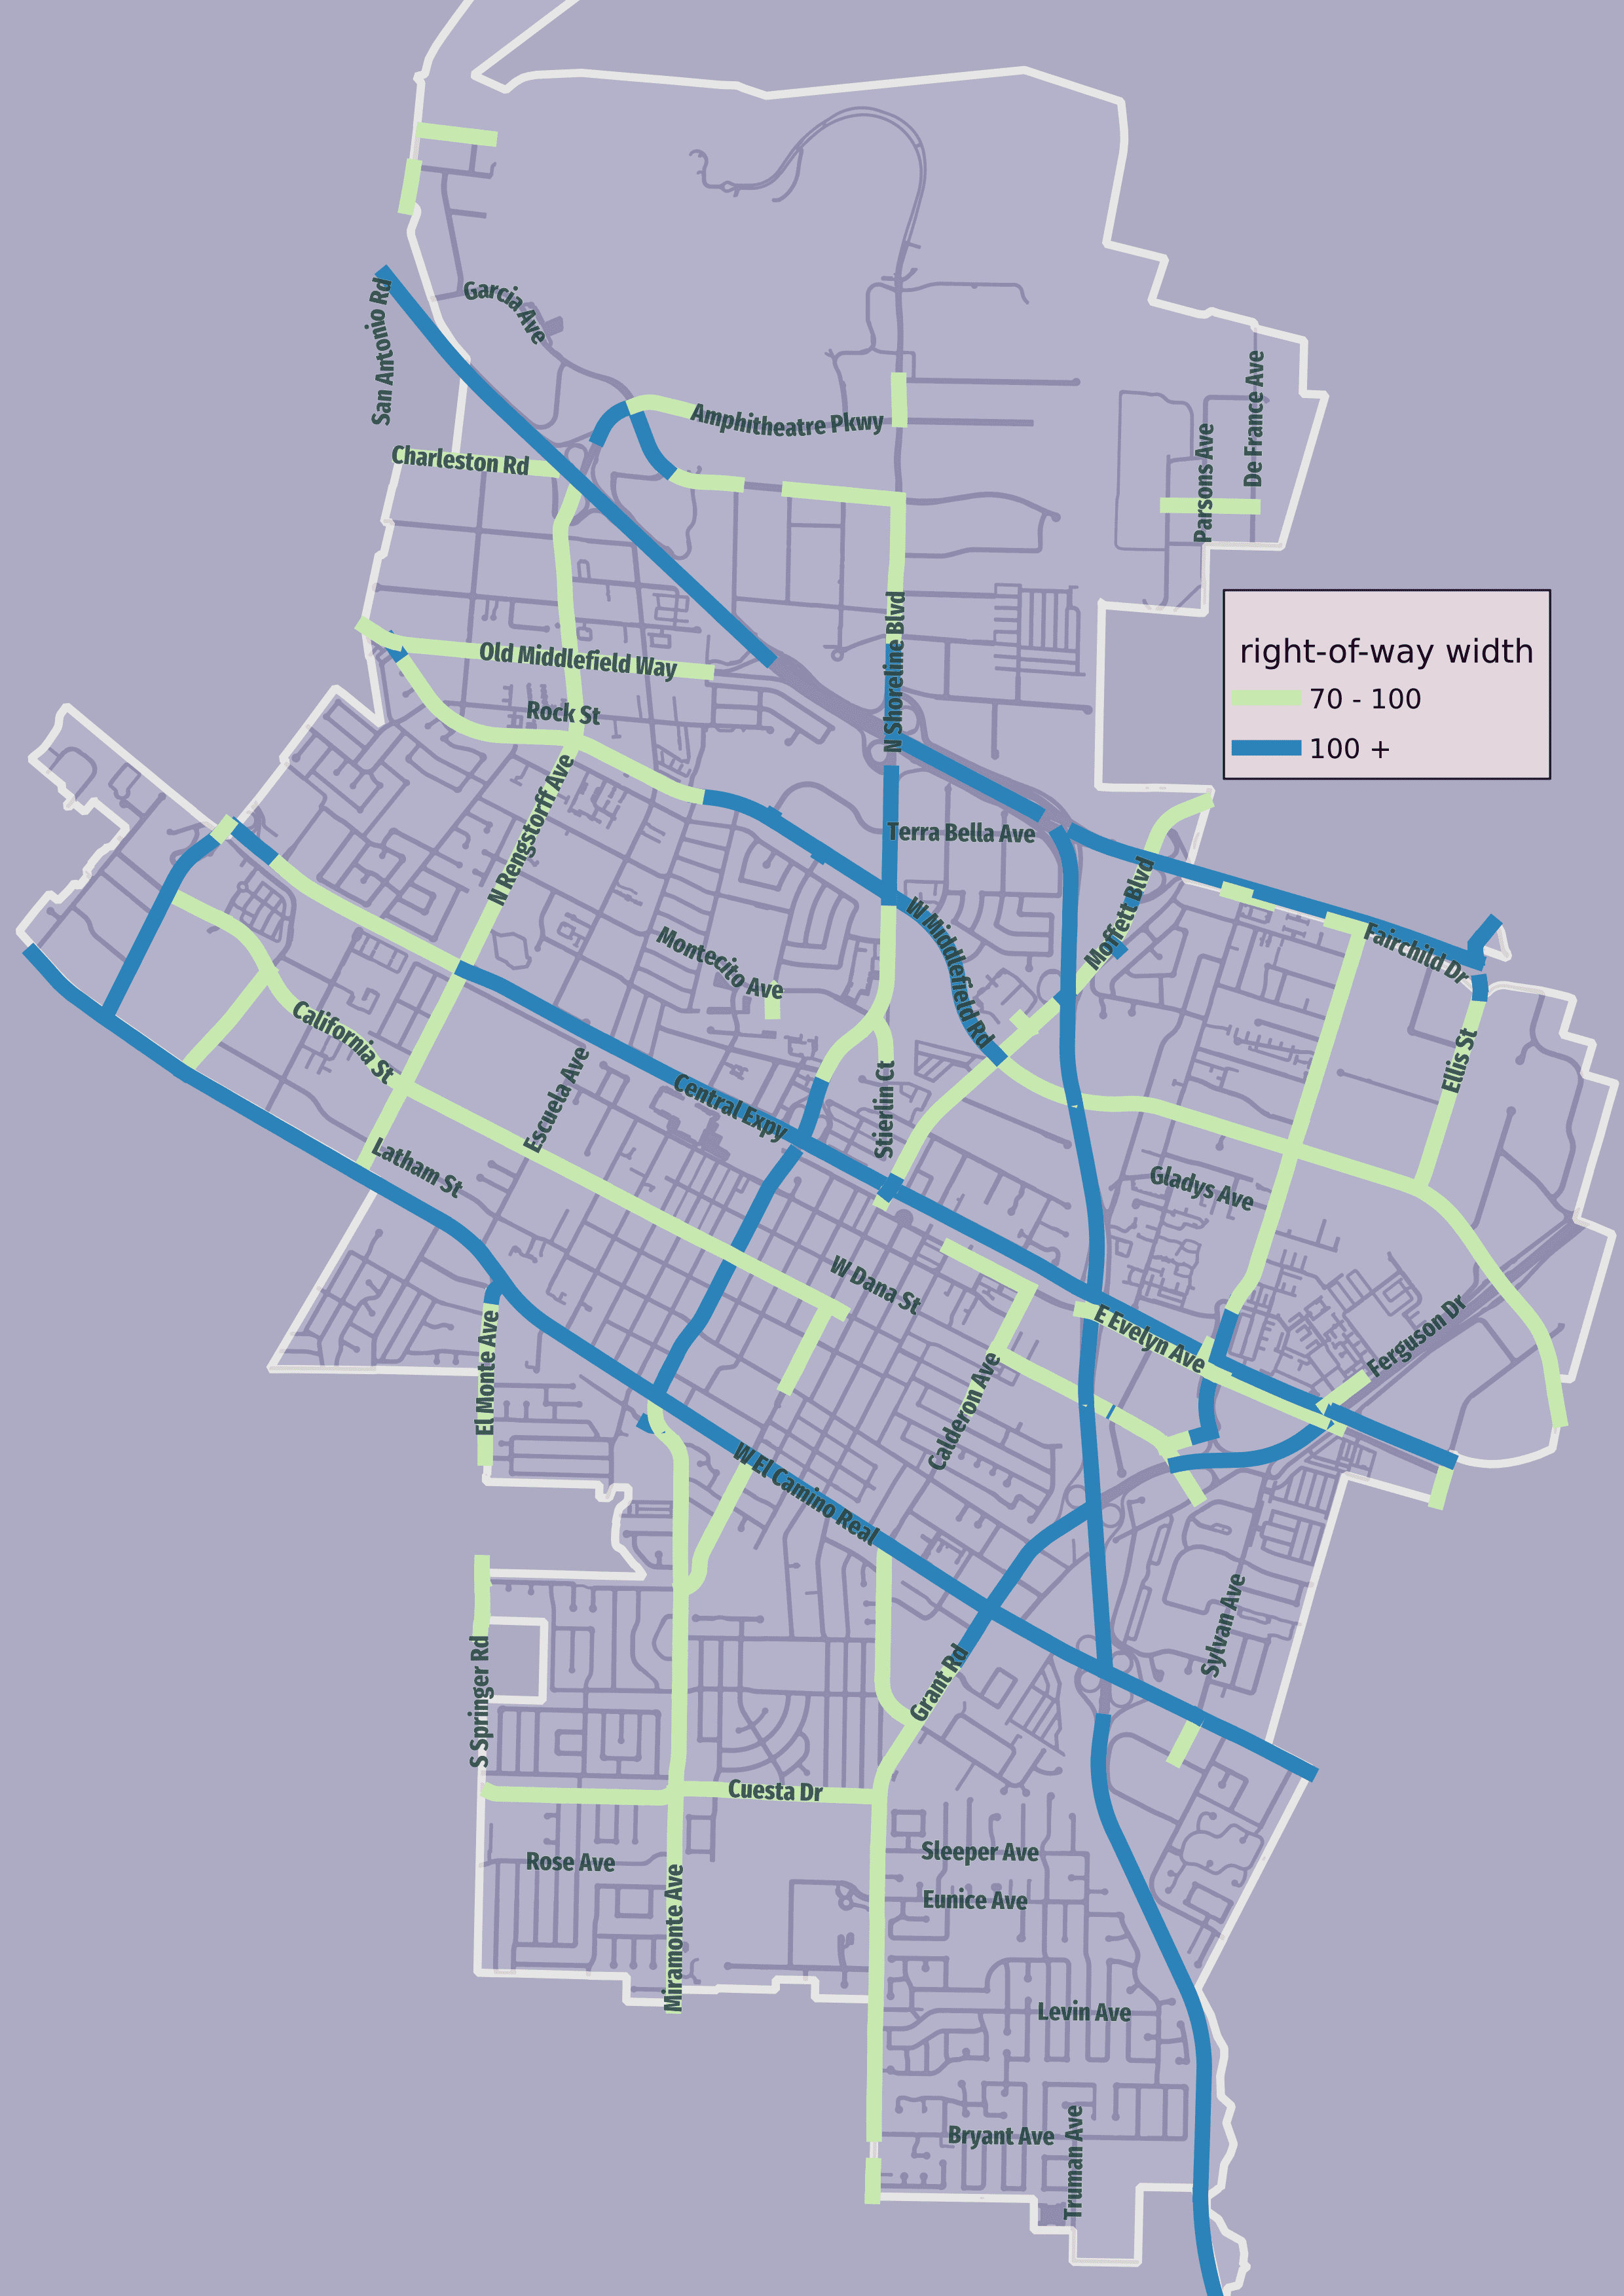 Map of streets with right-of-way larger than 70 feet